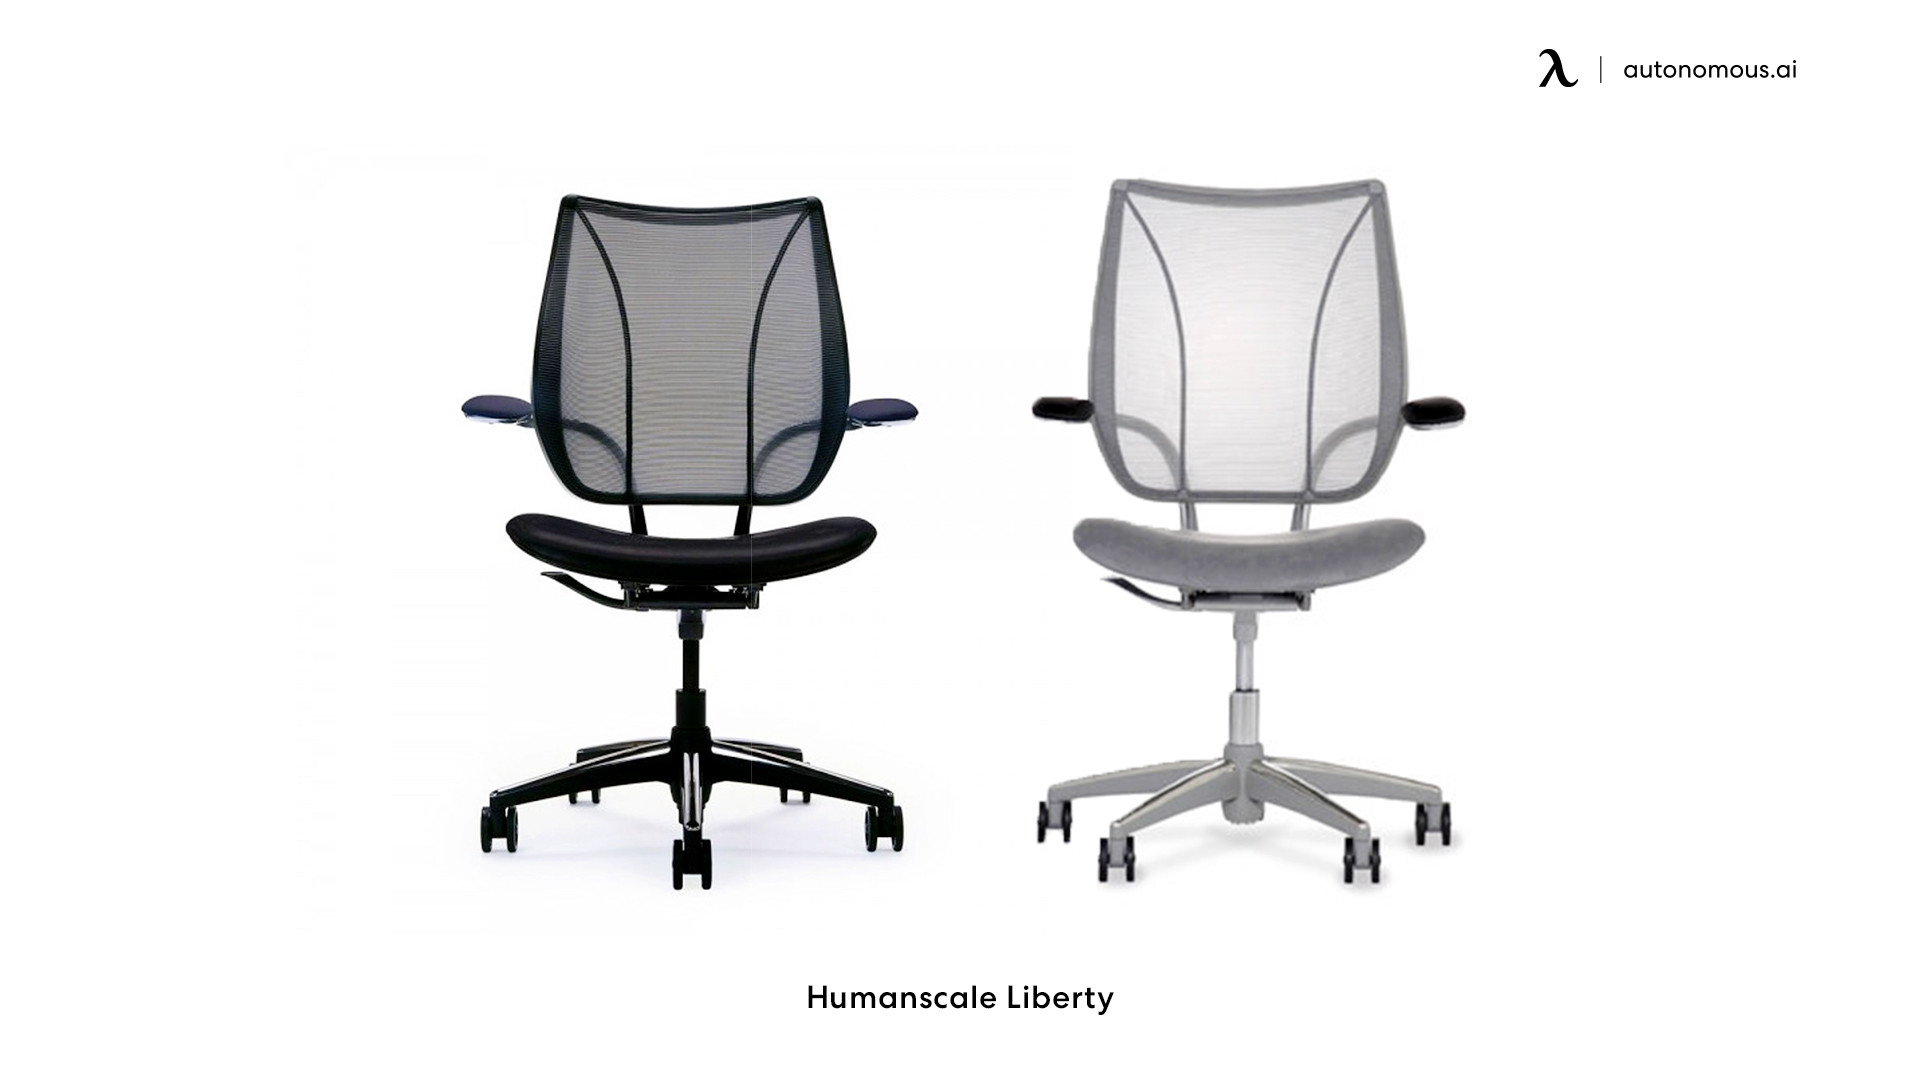 Humanscale Liberty affordable mesh chair